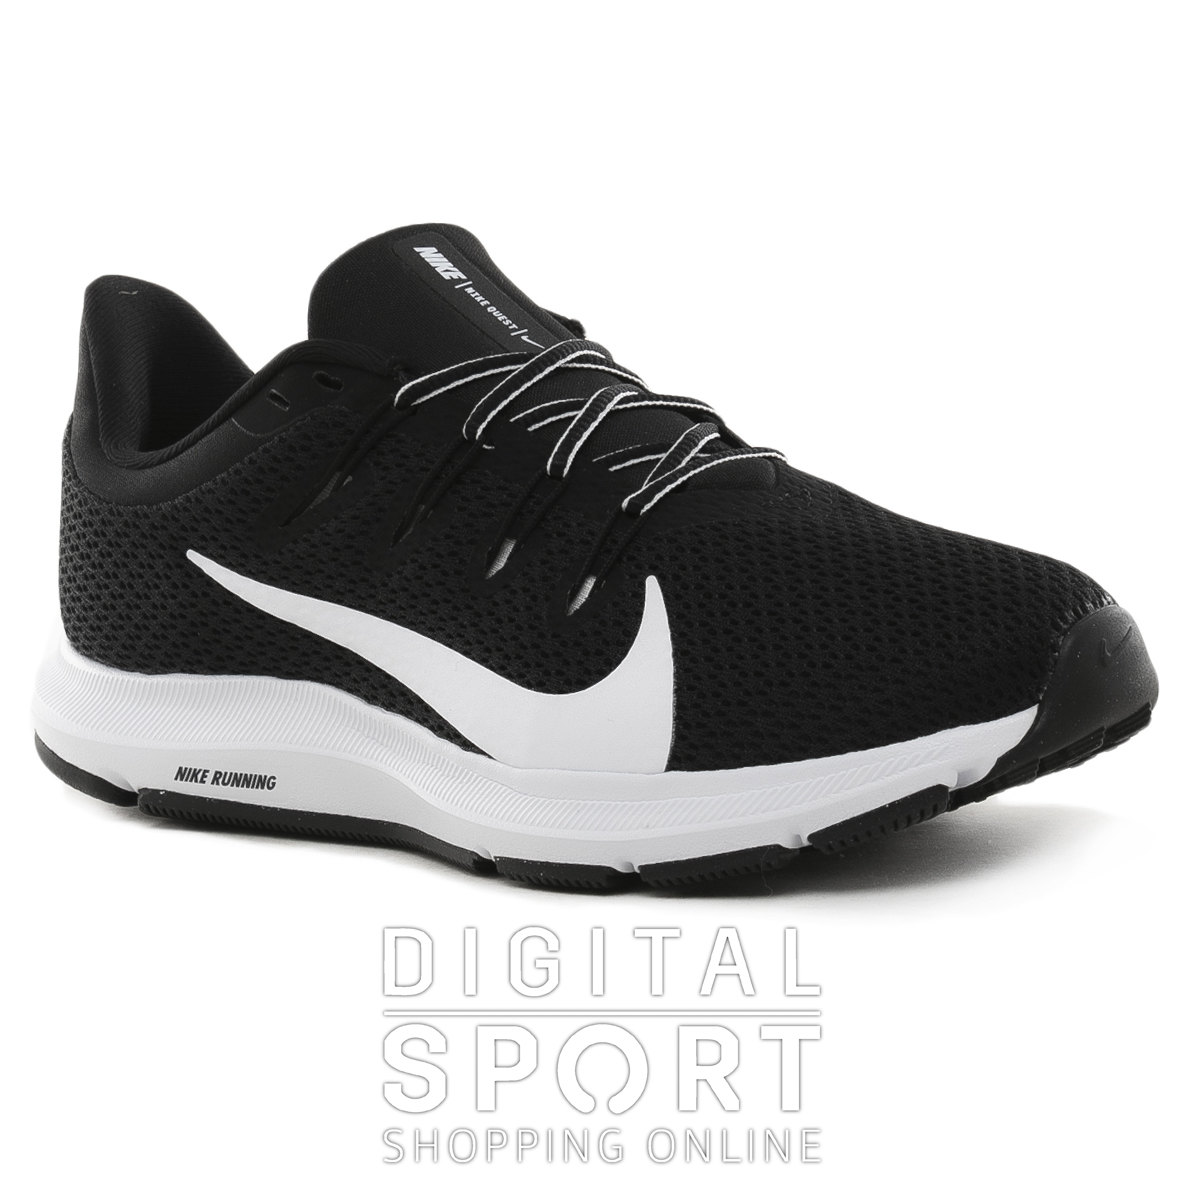 nike quest mujer negra